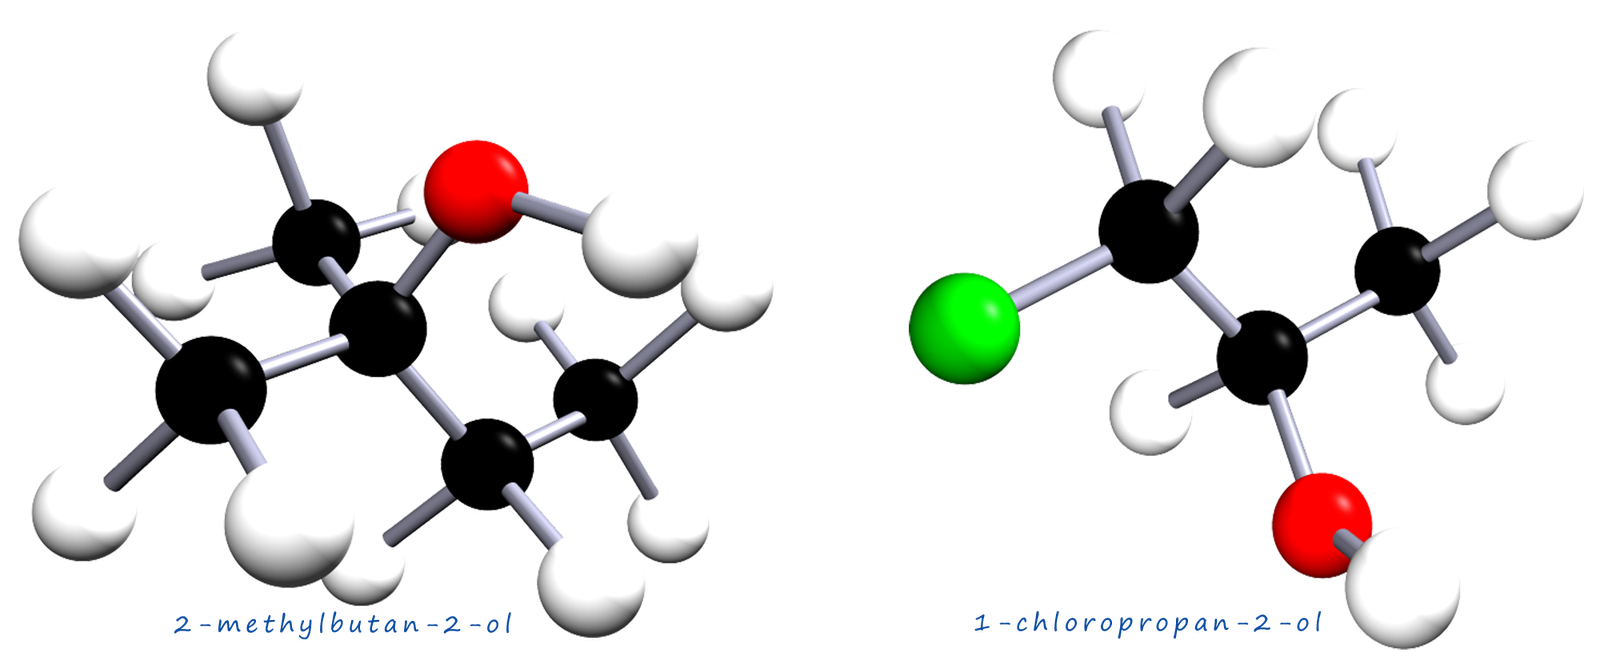 3d models of different alcohol molecules along with their names.